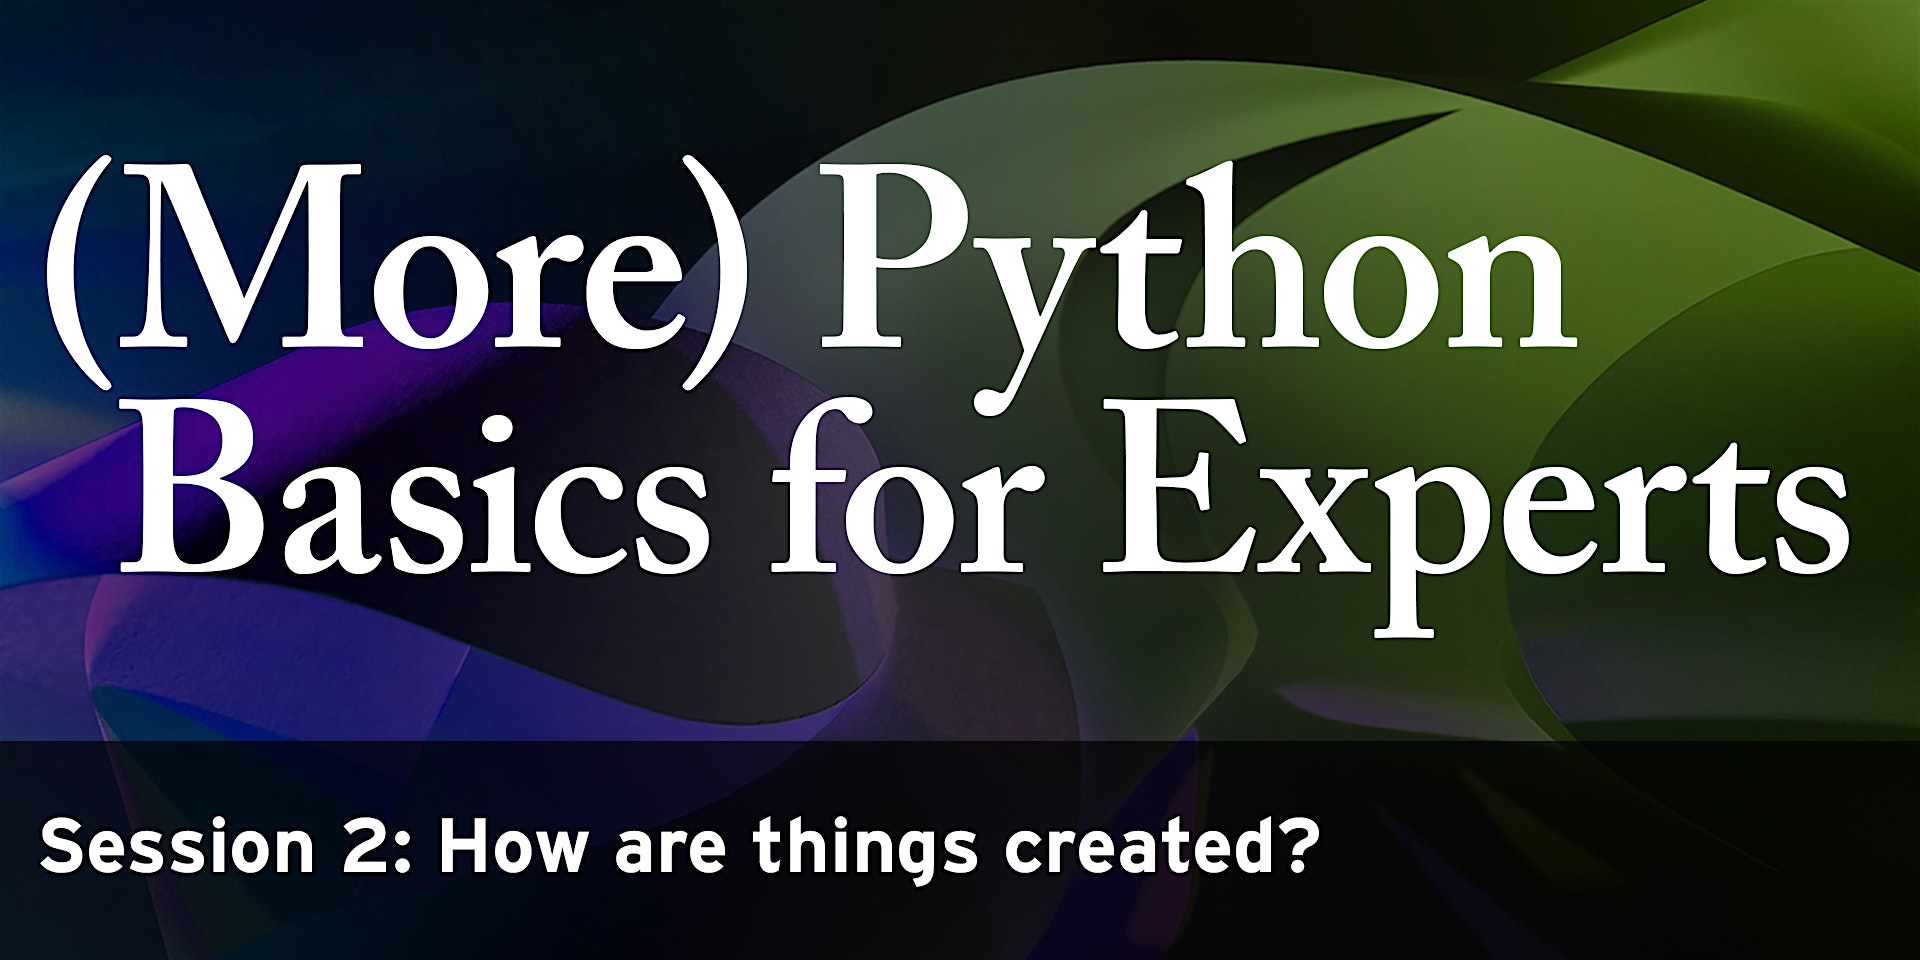 FRI, AUG 12, 2022 - (More) Python Basics for Experts II - How are things created?